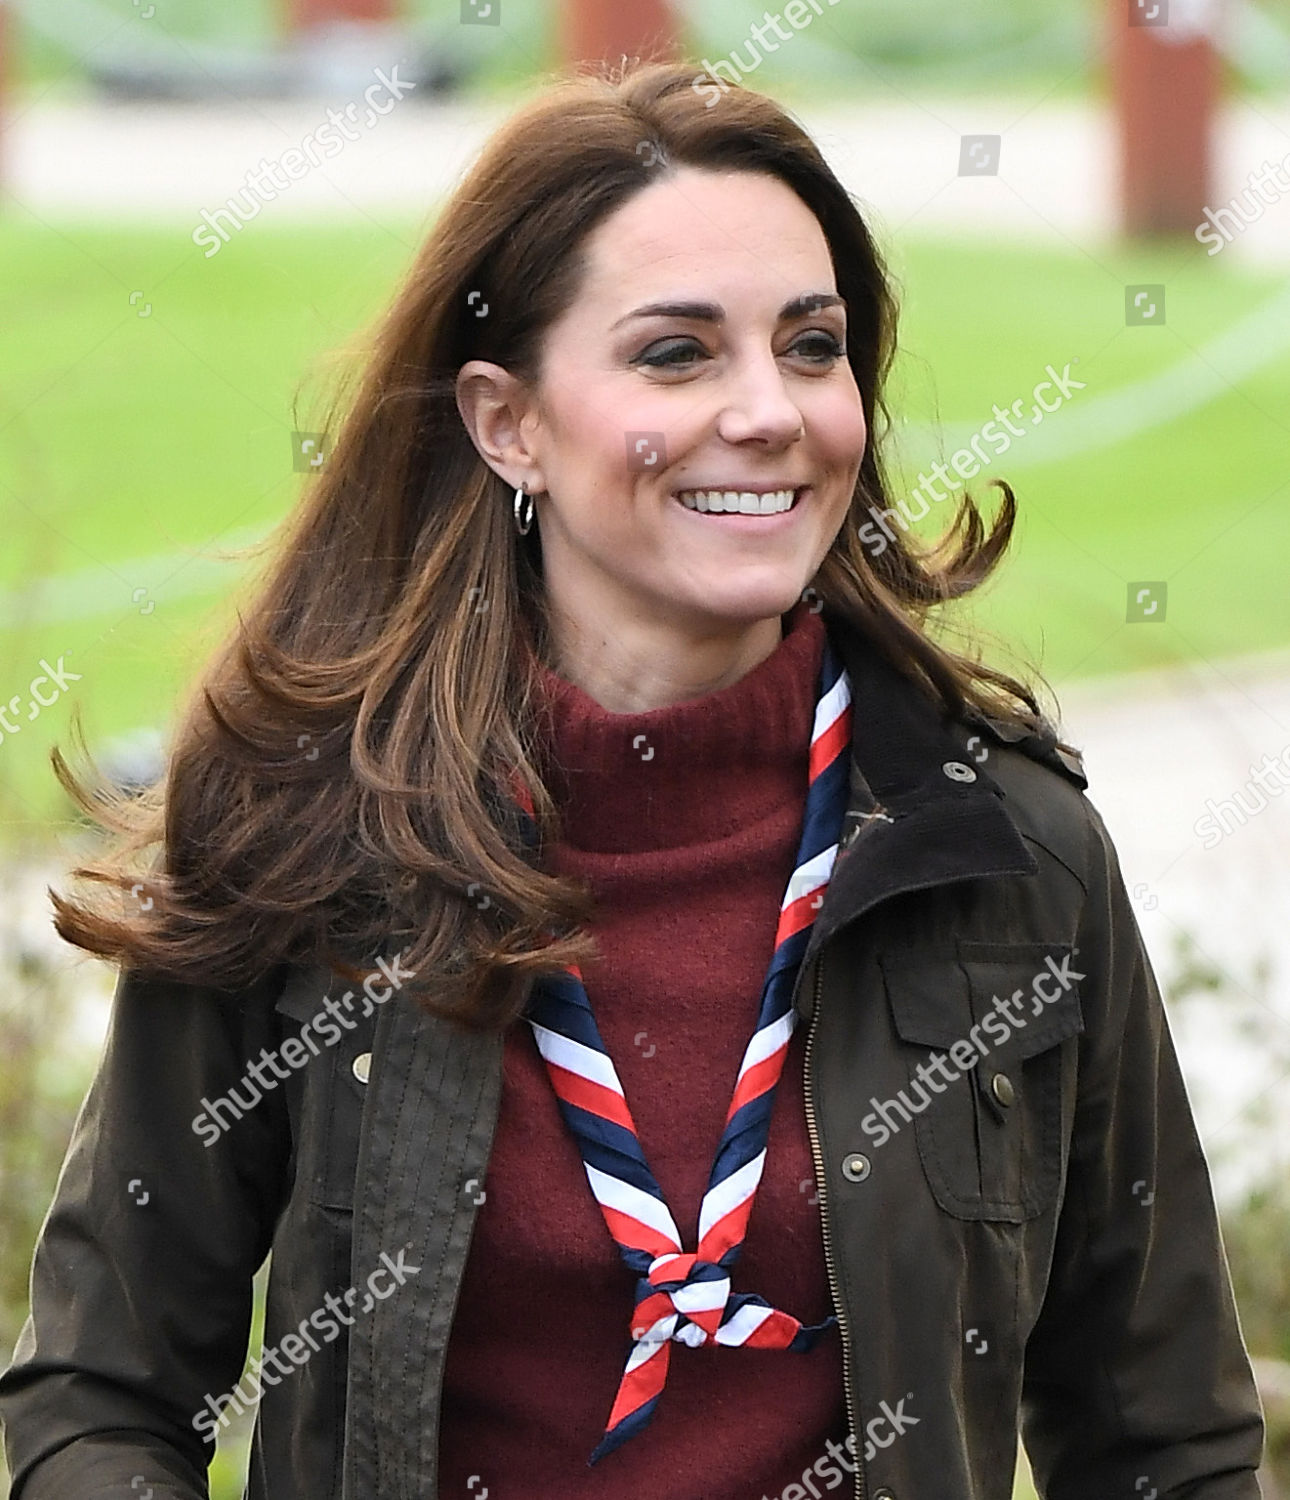 catherine-duchess-of-cambridge-visit-to-the-scouts-gilwell-park-essex-uk-shutterstock-editorial-10179979aj.jpg